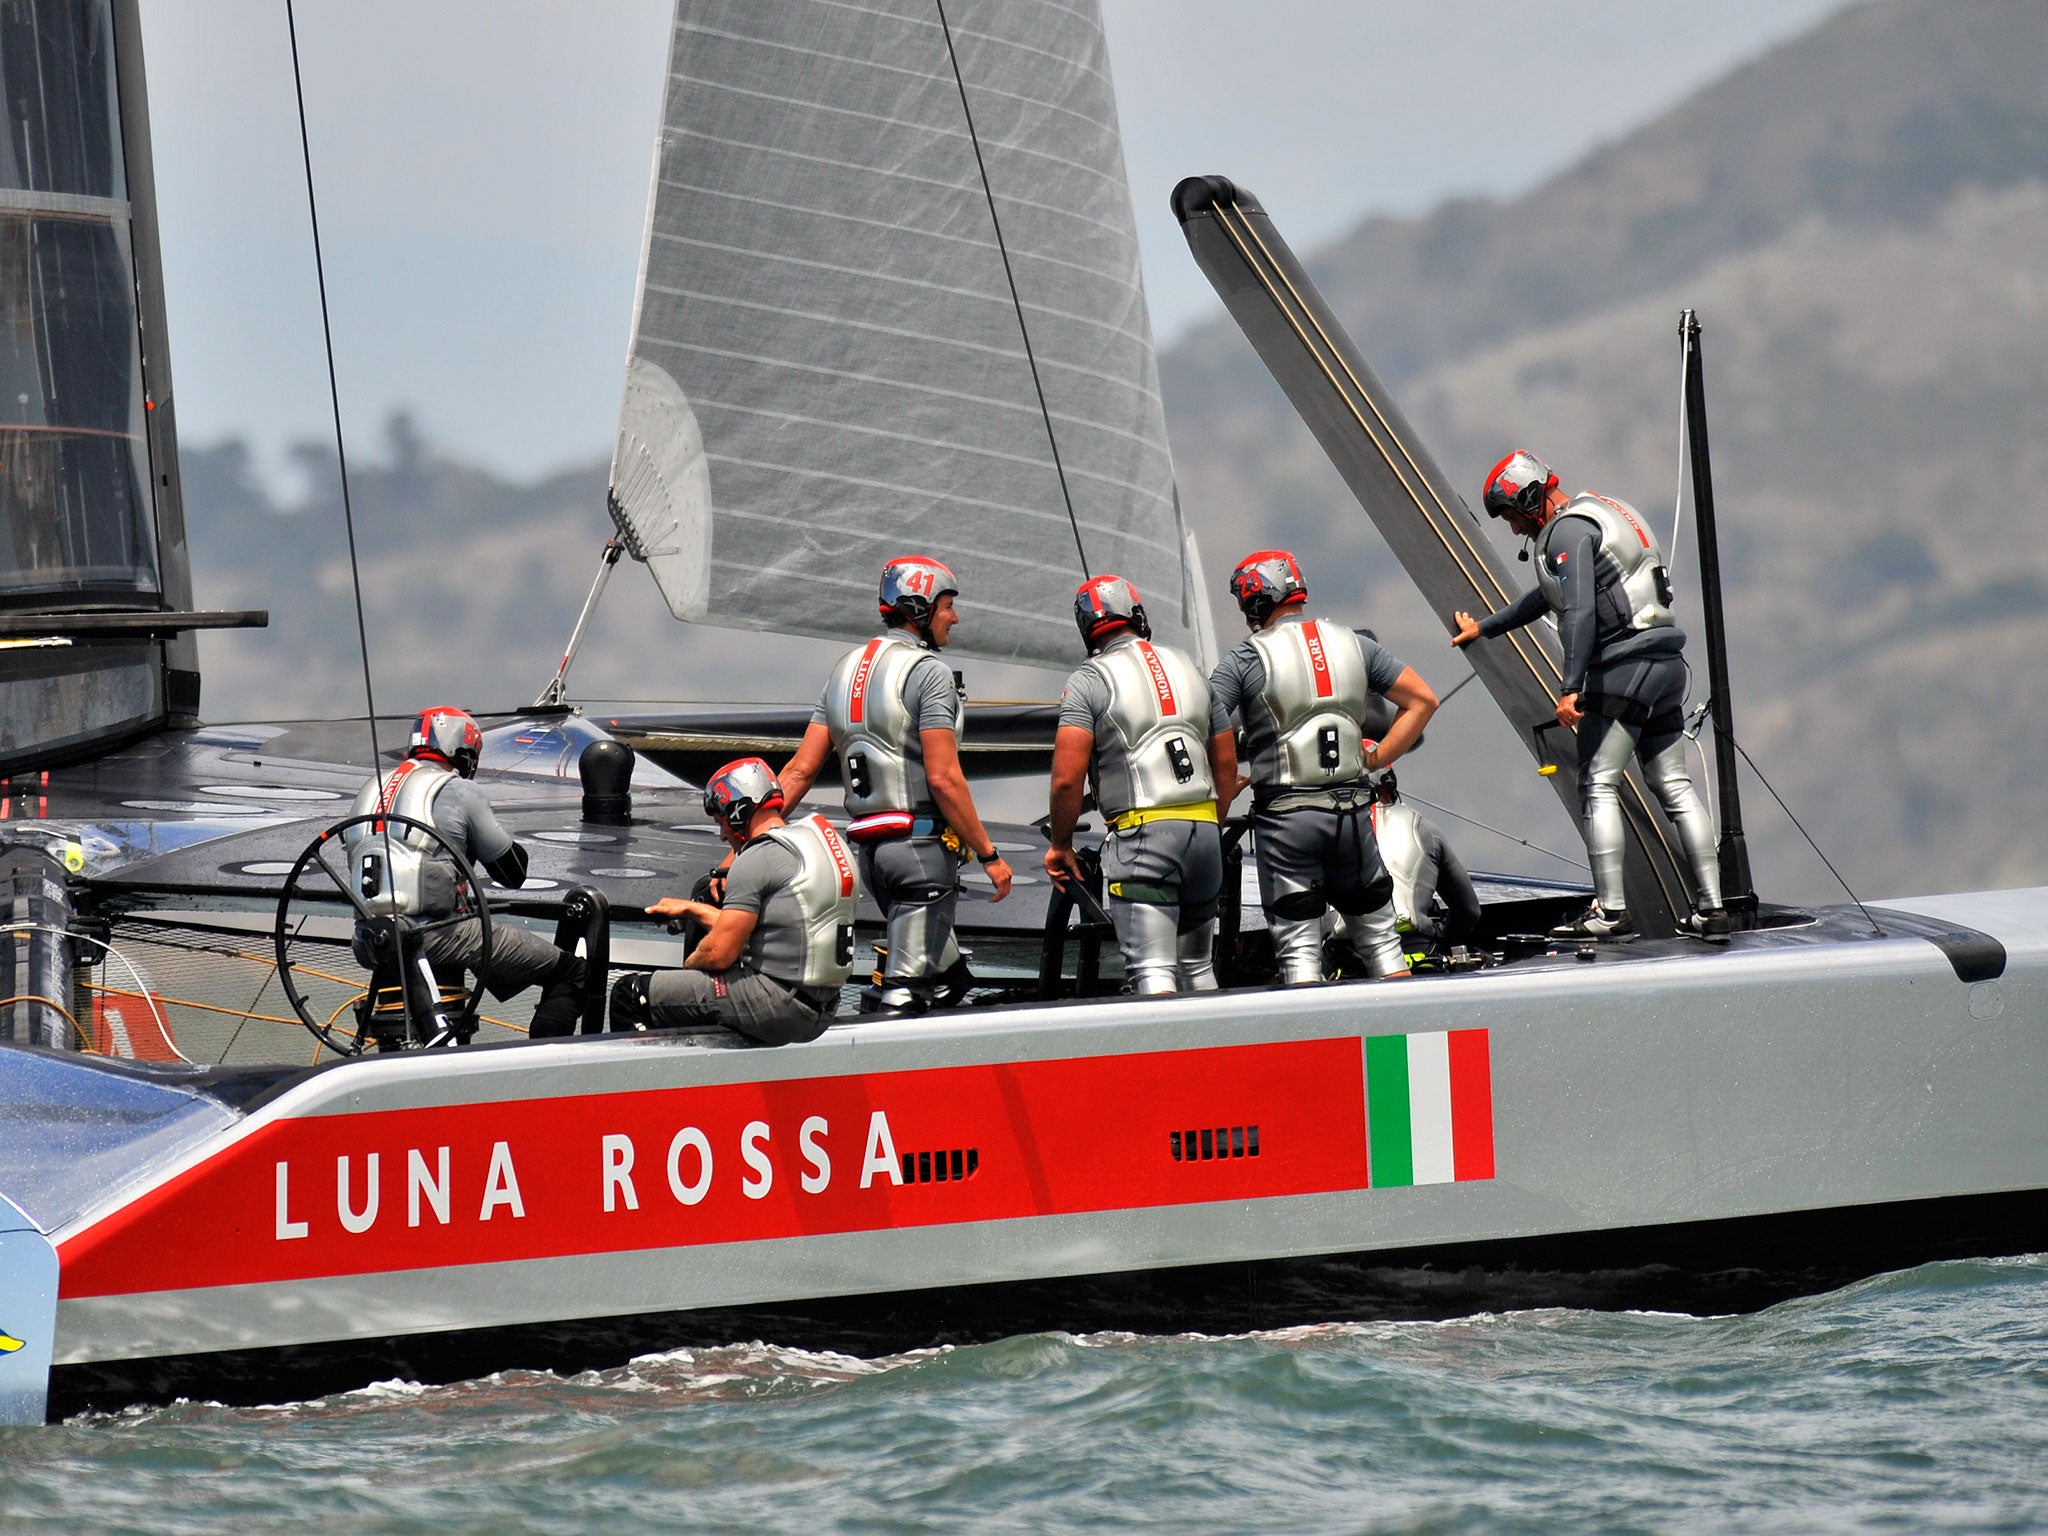 Luna Rossa said: Following the announcement of Team Australia its intention to withdraw from the competition